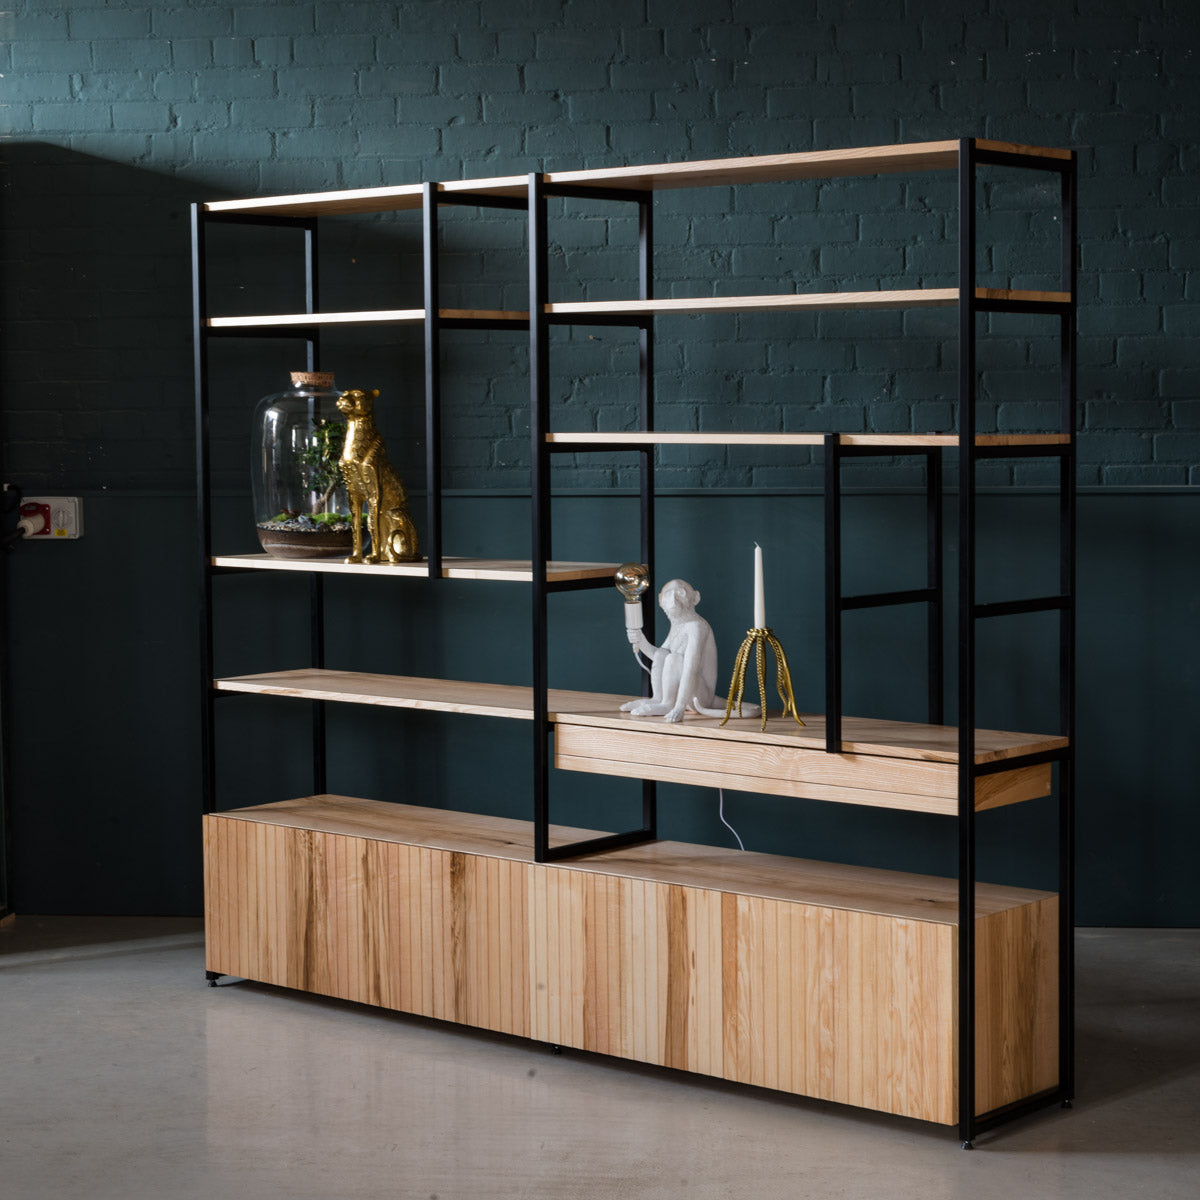 An image of the Shelving Unit, Frame product available from Koda Studios